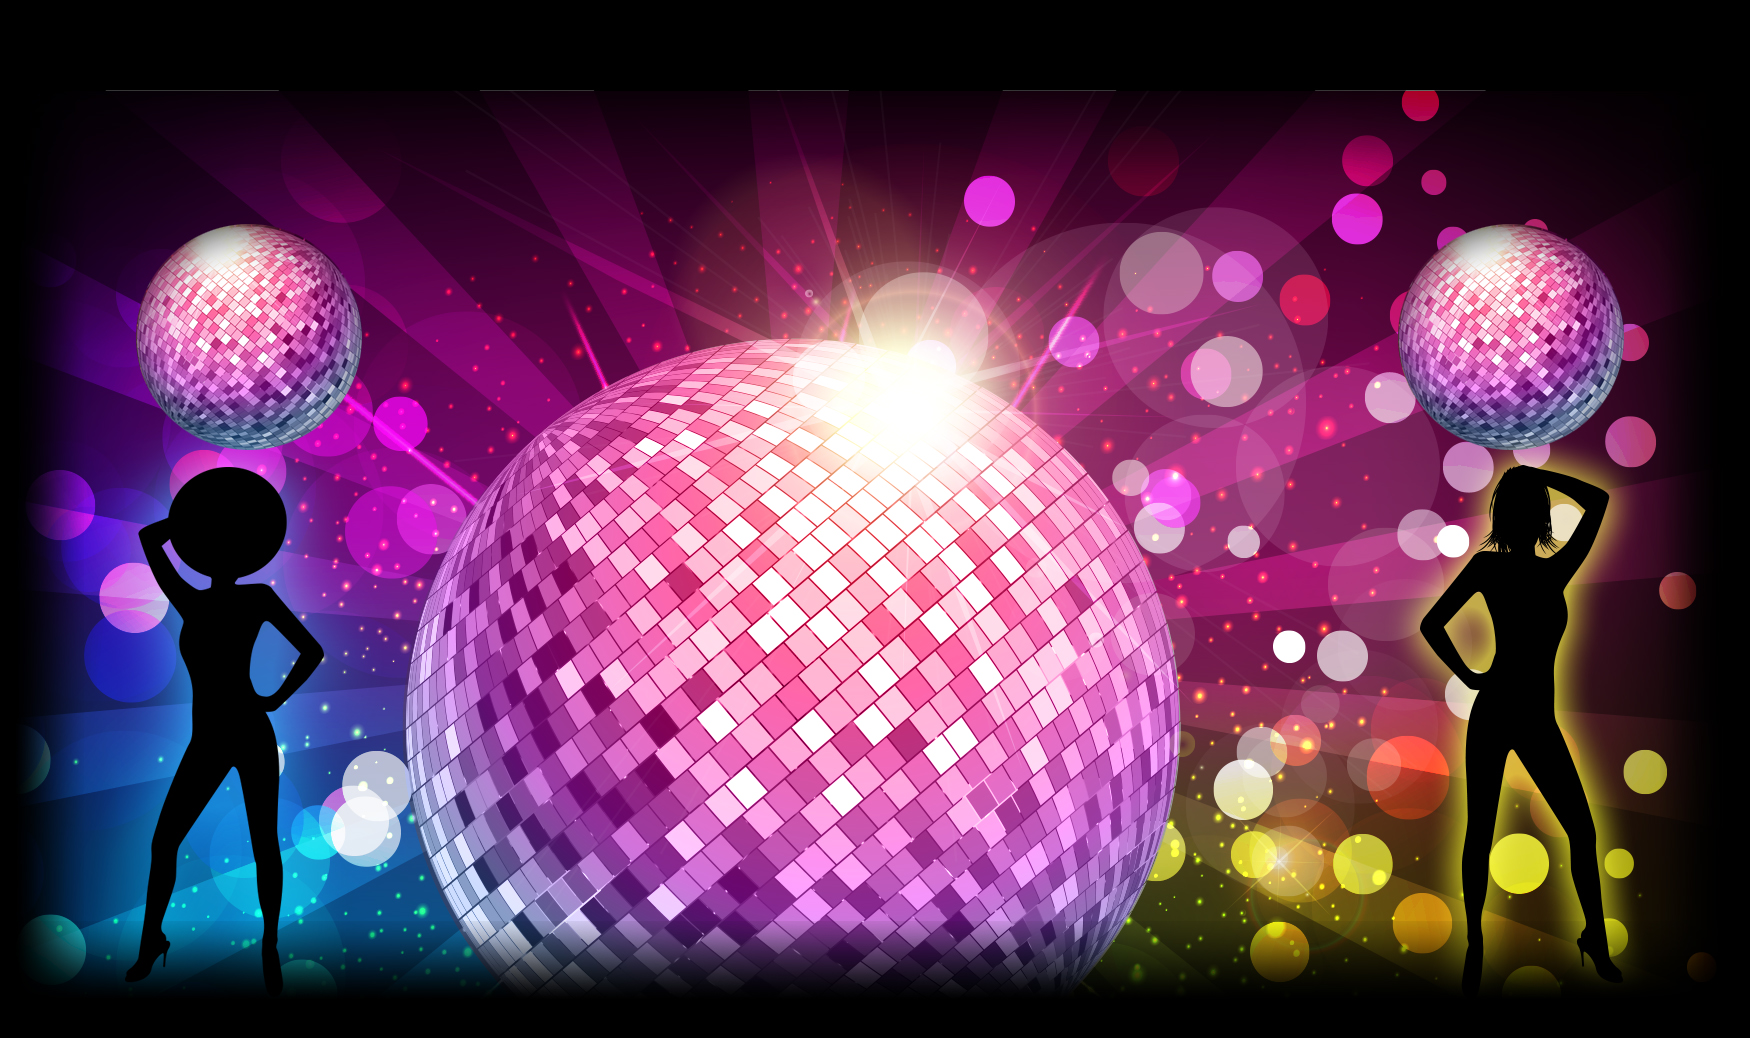 Disco Wallpaper 98 images in Collection Page 1